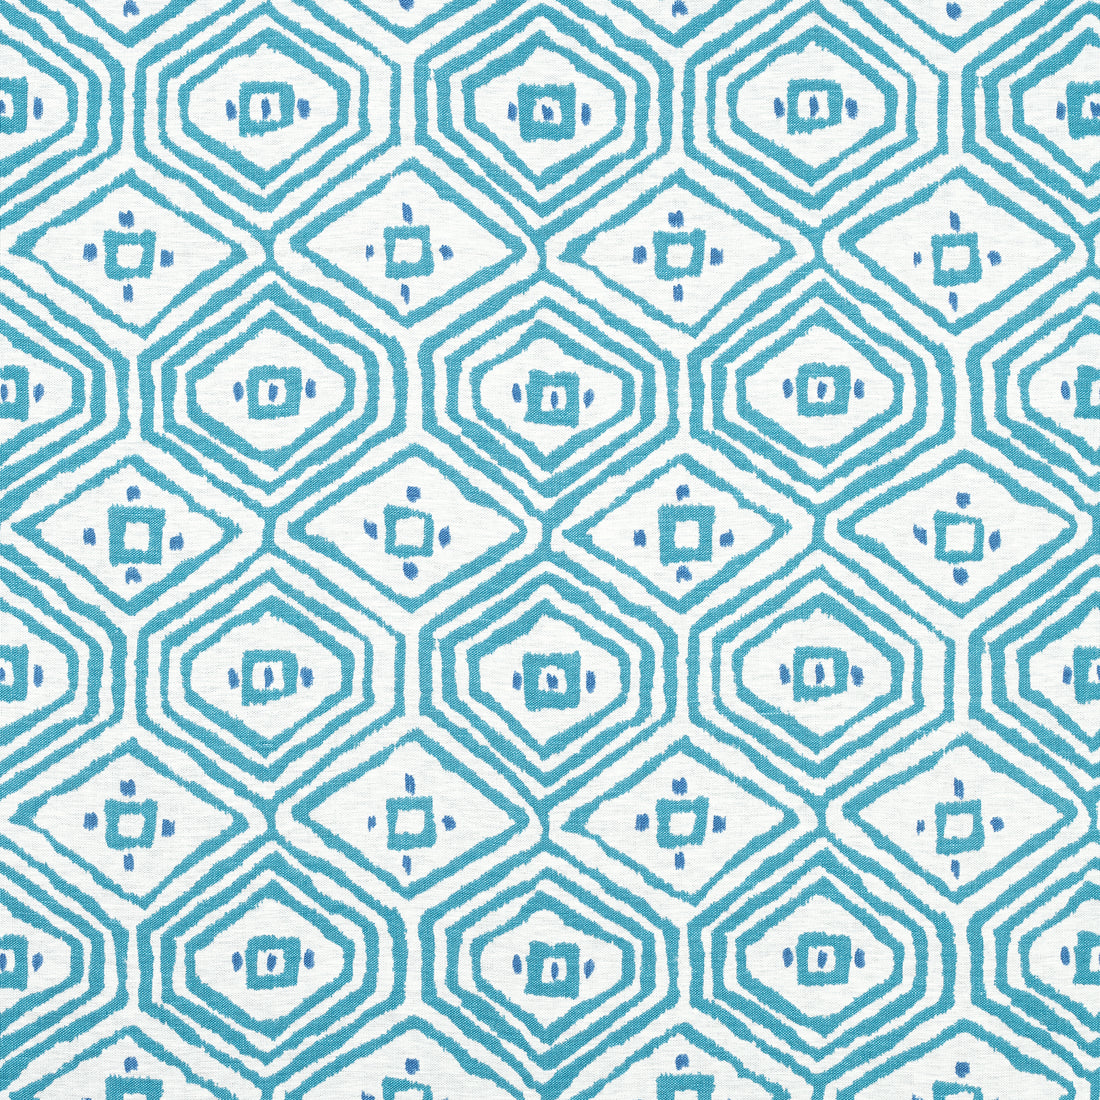 Pass-A-Grille fabric in turquoise color - pattern number F910618 - by Thibaut in the Ceylon collection